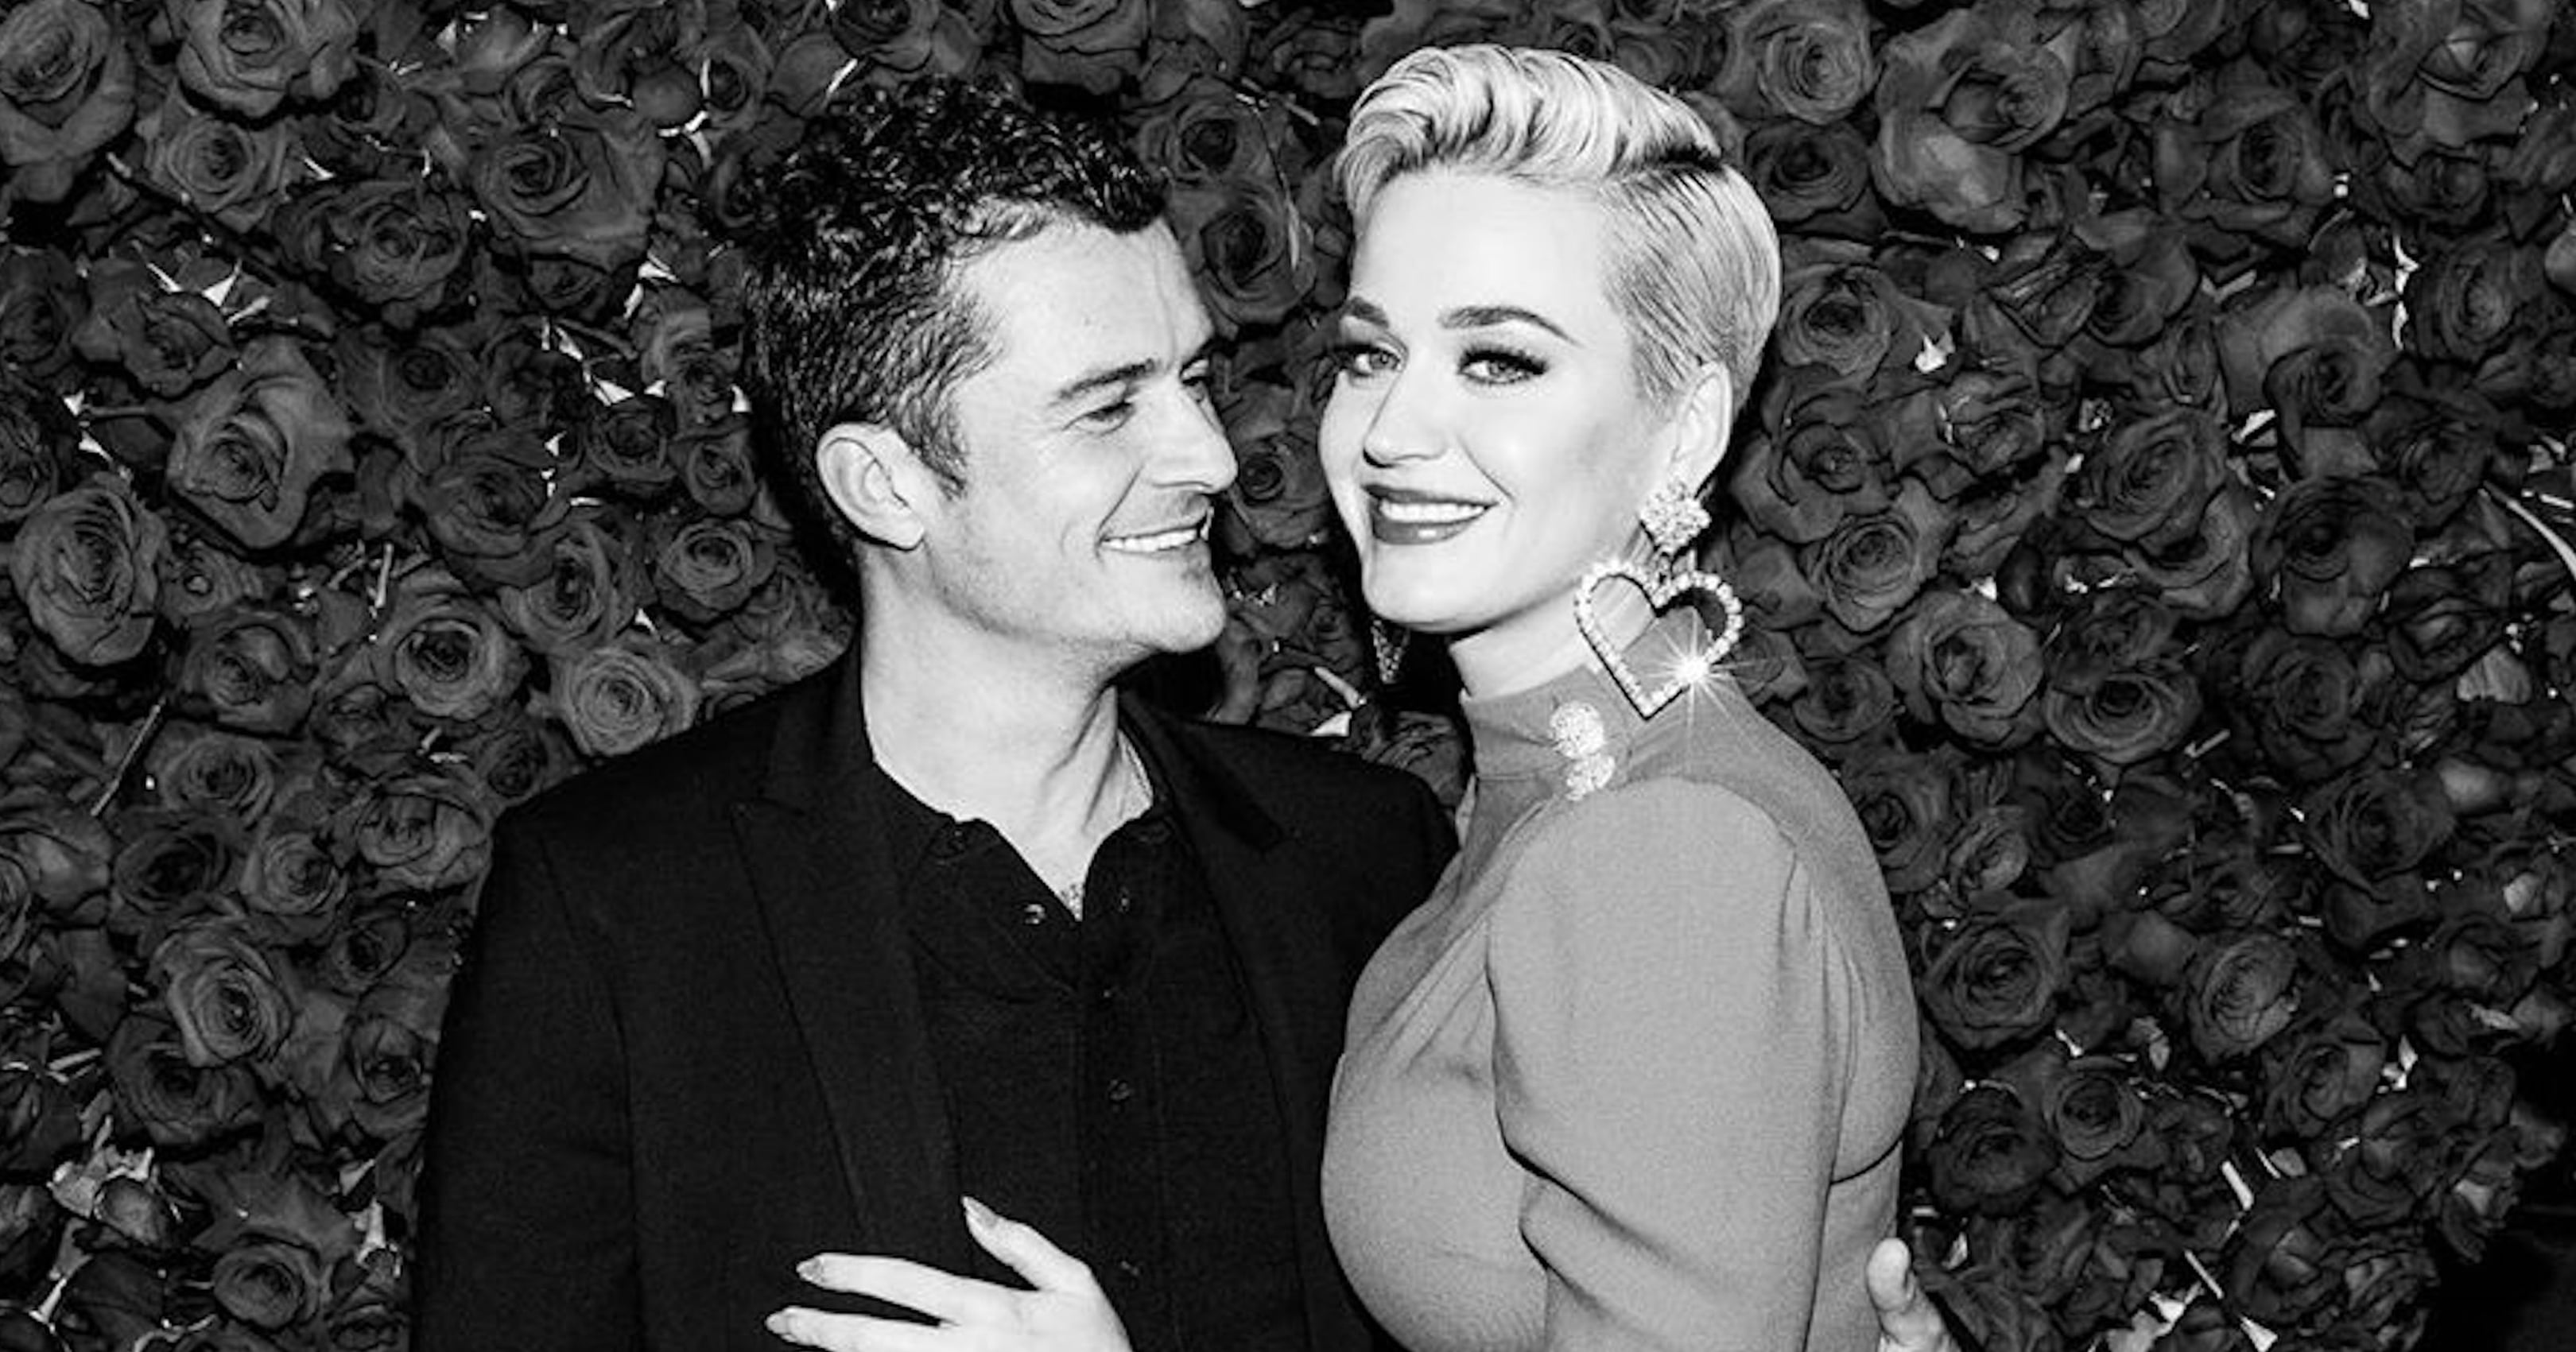 Katy Perry & Orlando Bloom: Photos Of The Couple – Hollywood Life